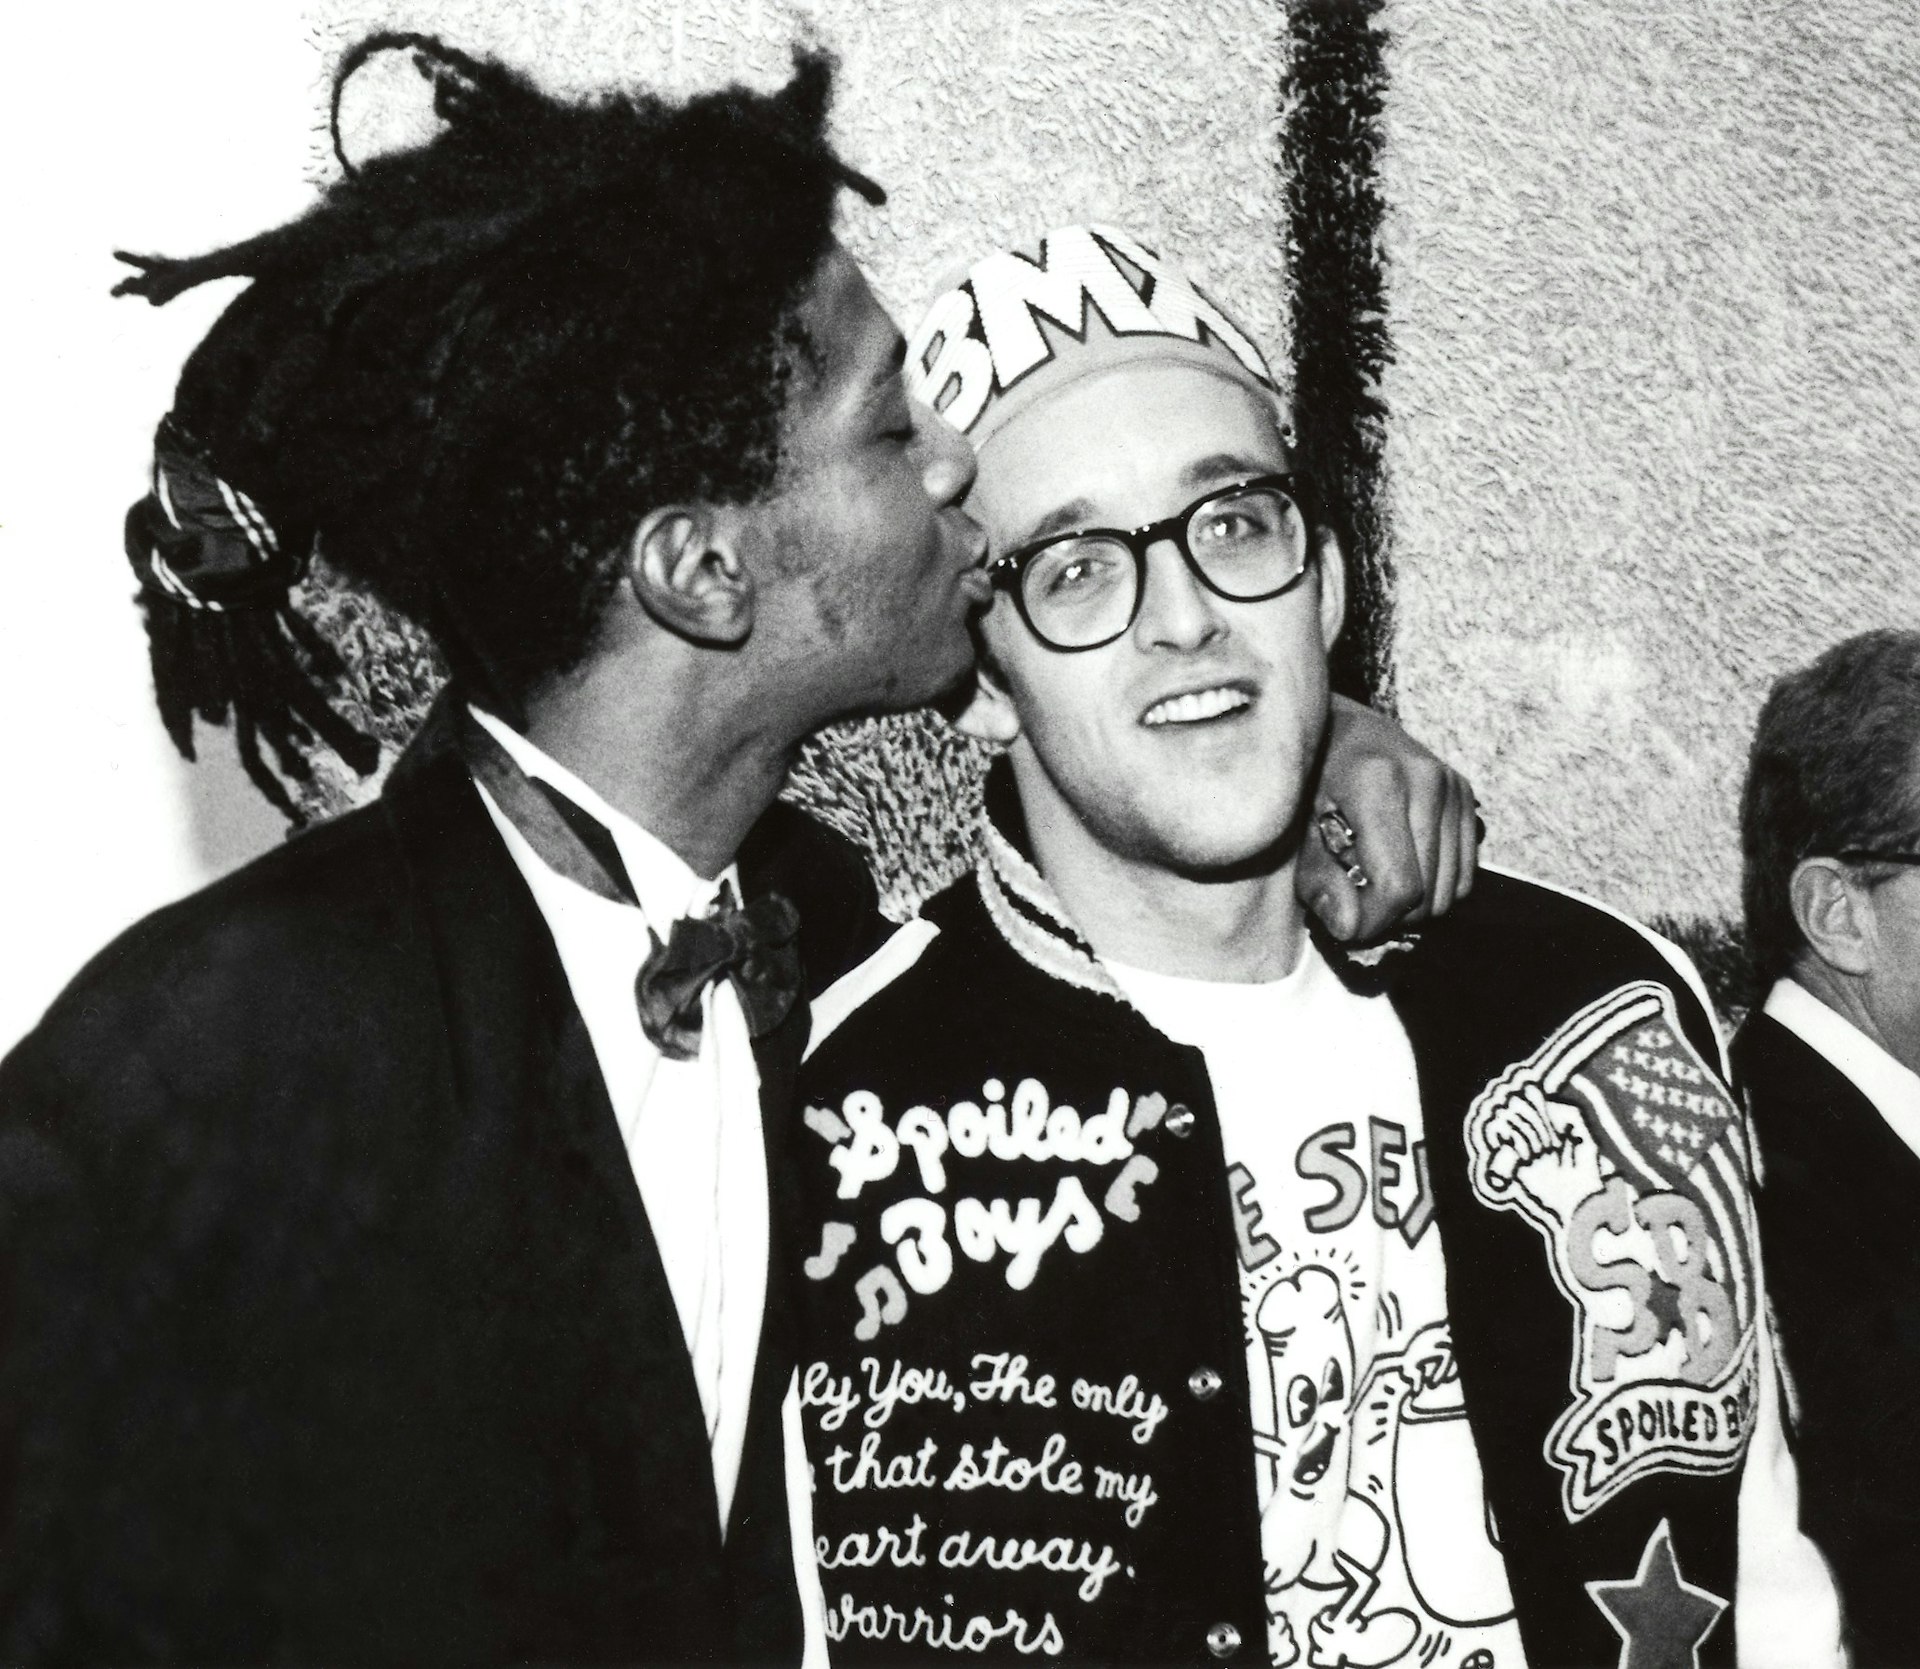 Jean-Michel Basquiat and Keith Haring. Photo by George Hirose.